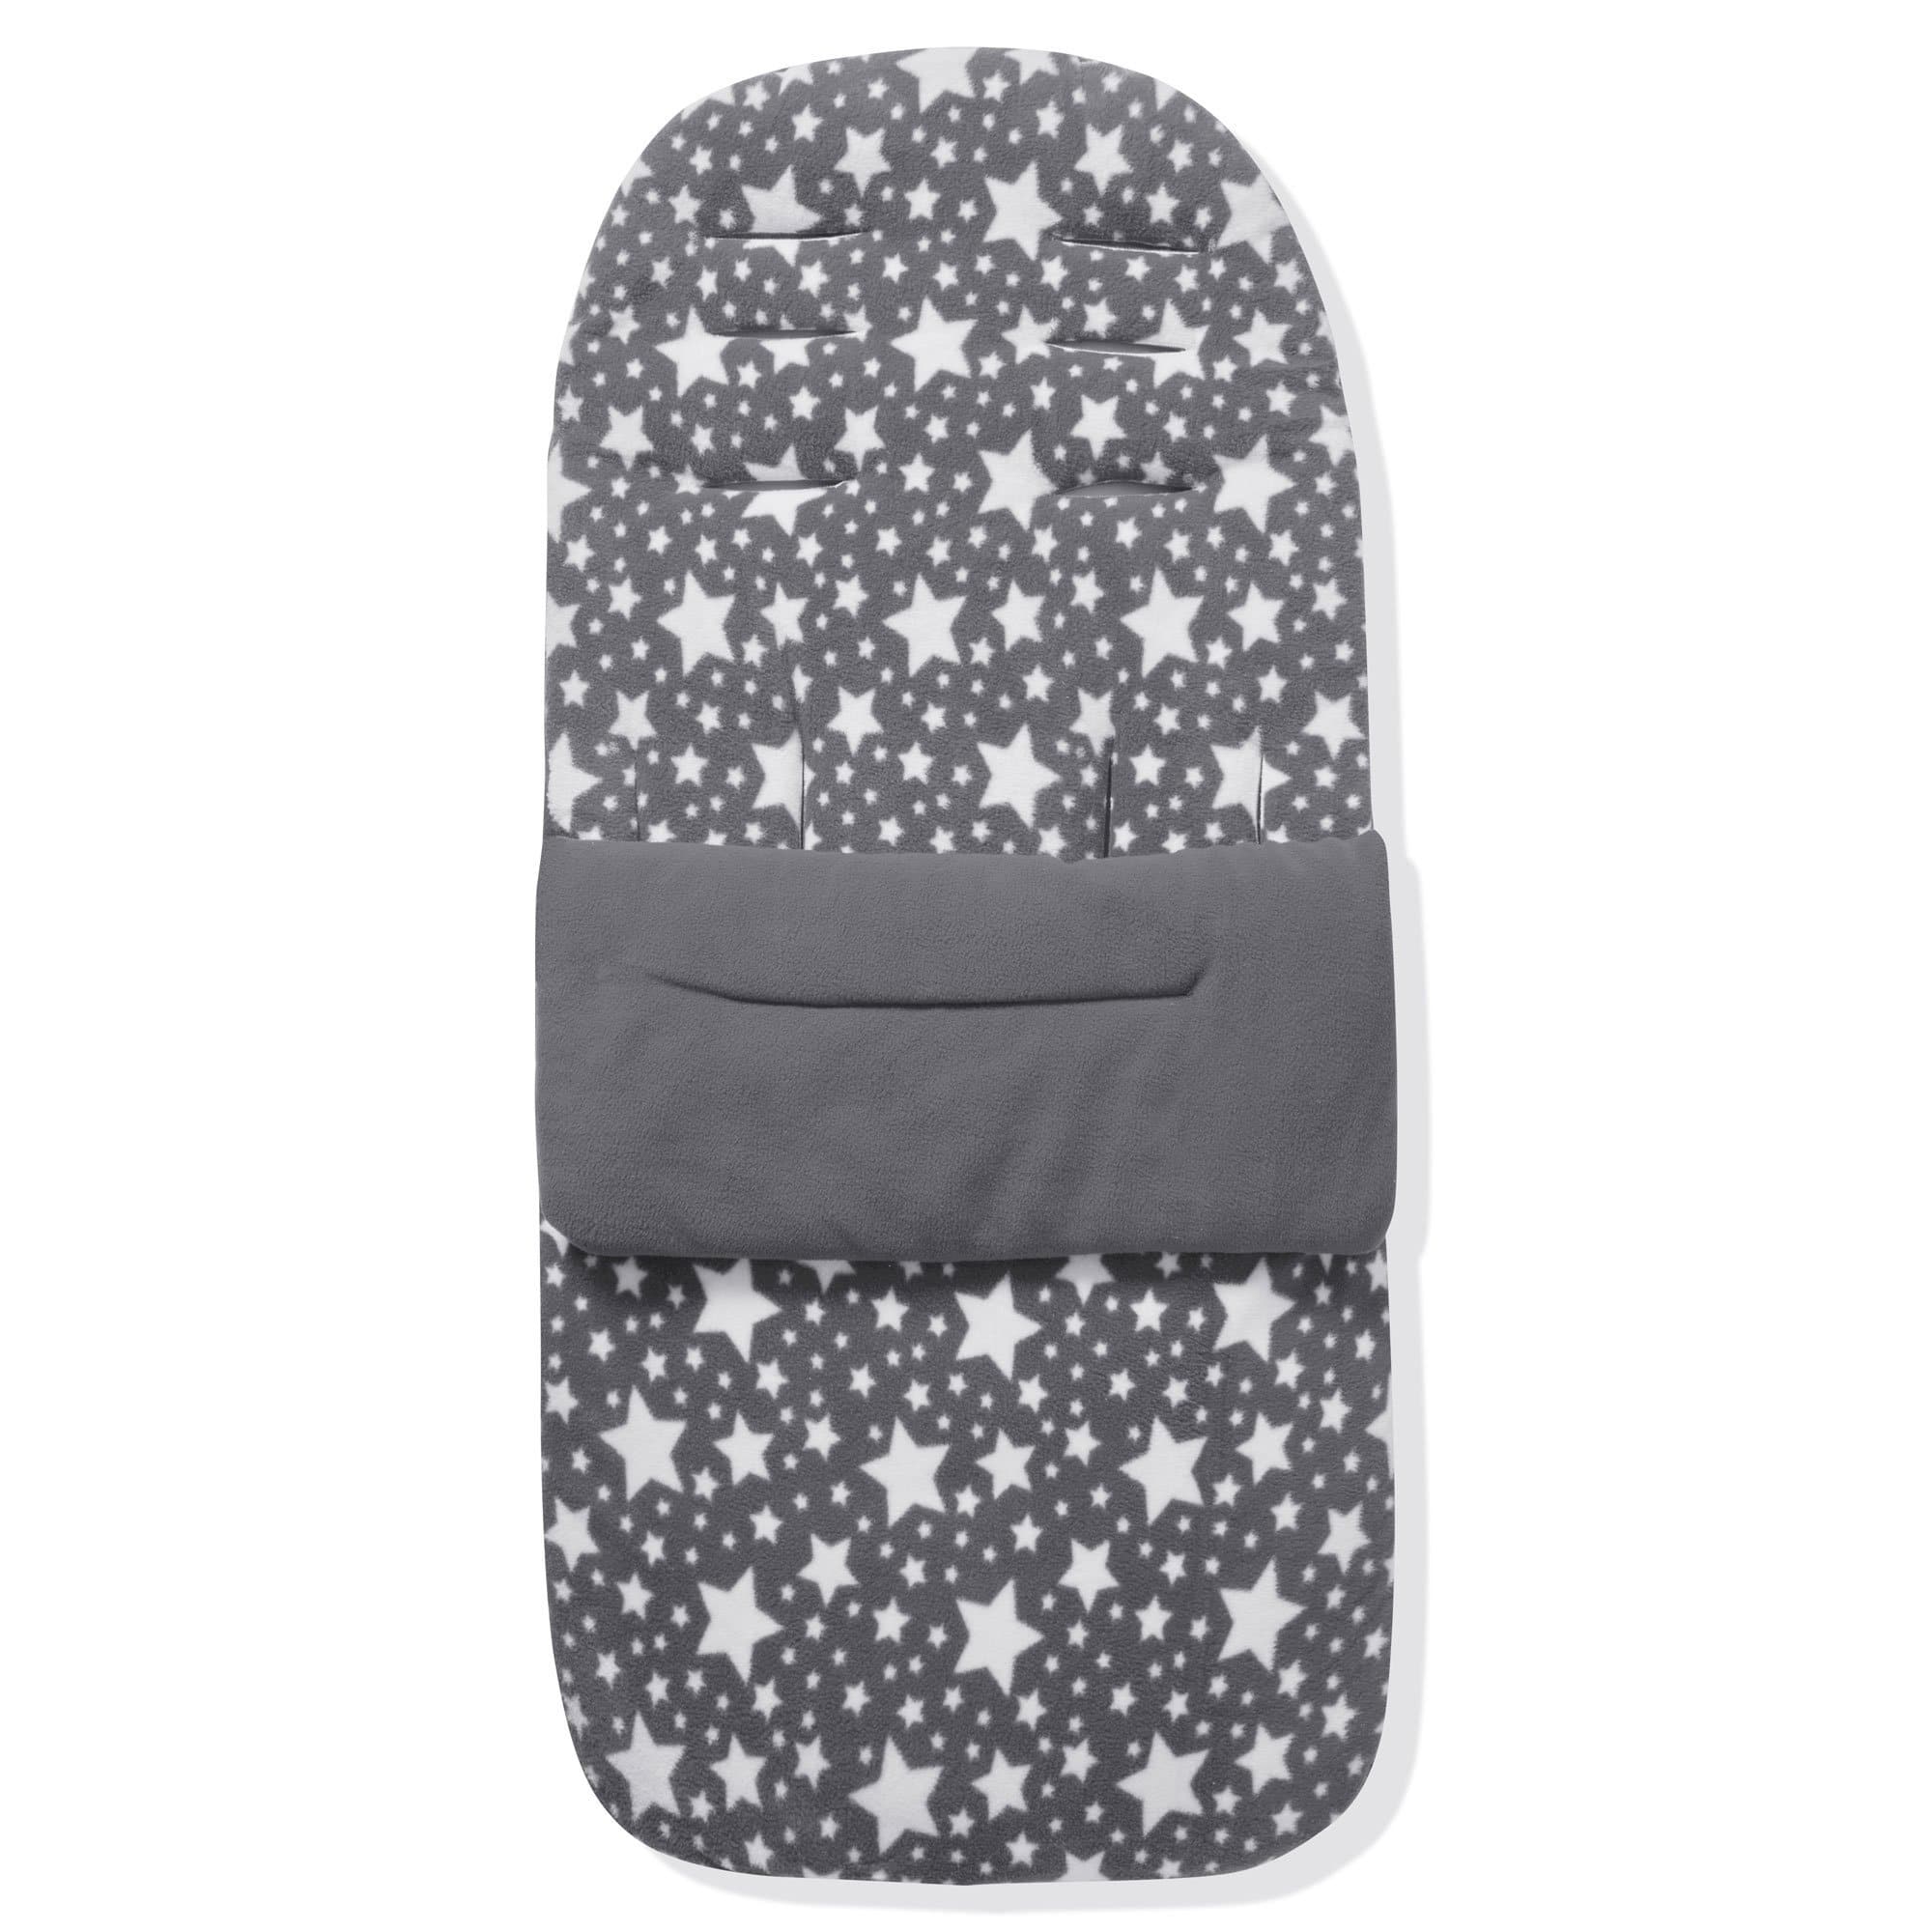 Fleece Footmuff / Cosy Toes Compatible With Chicco - Grey Star / Fits All Models | For Your Little One